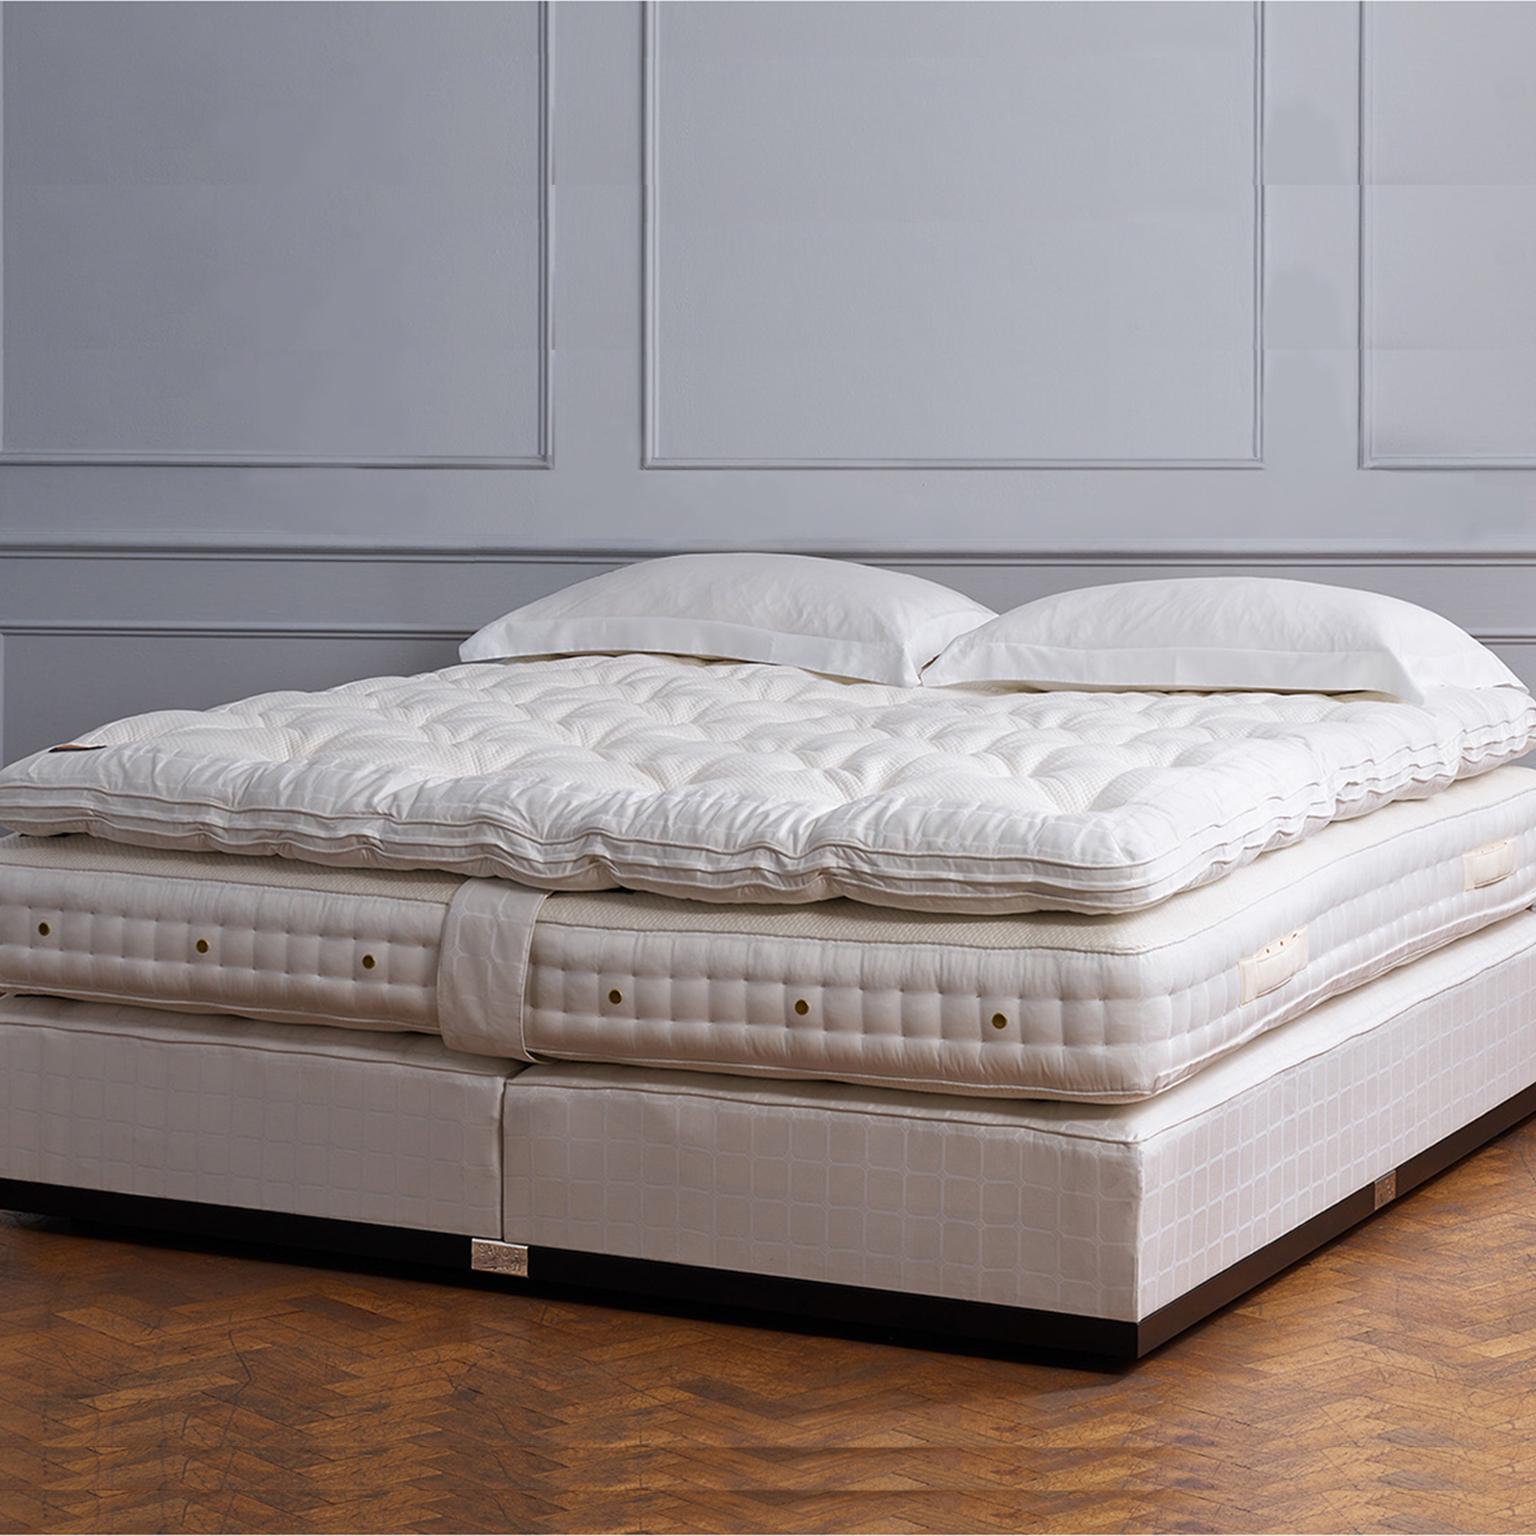 The pinnacle of over a century of bed-making expertise, requiring at least 120 hours of handcrafting, the Nº1 is the ultimate in luxury. Its foundation is a box spring base, crafted from the finest natural materials for optimum support - curled